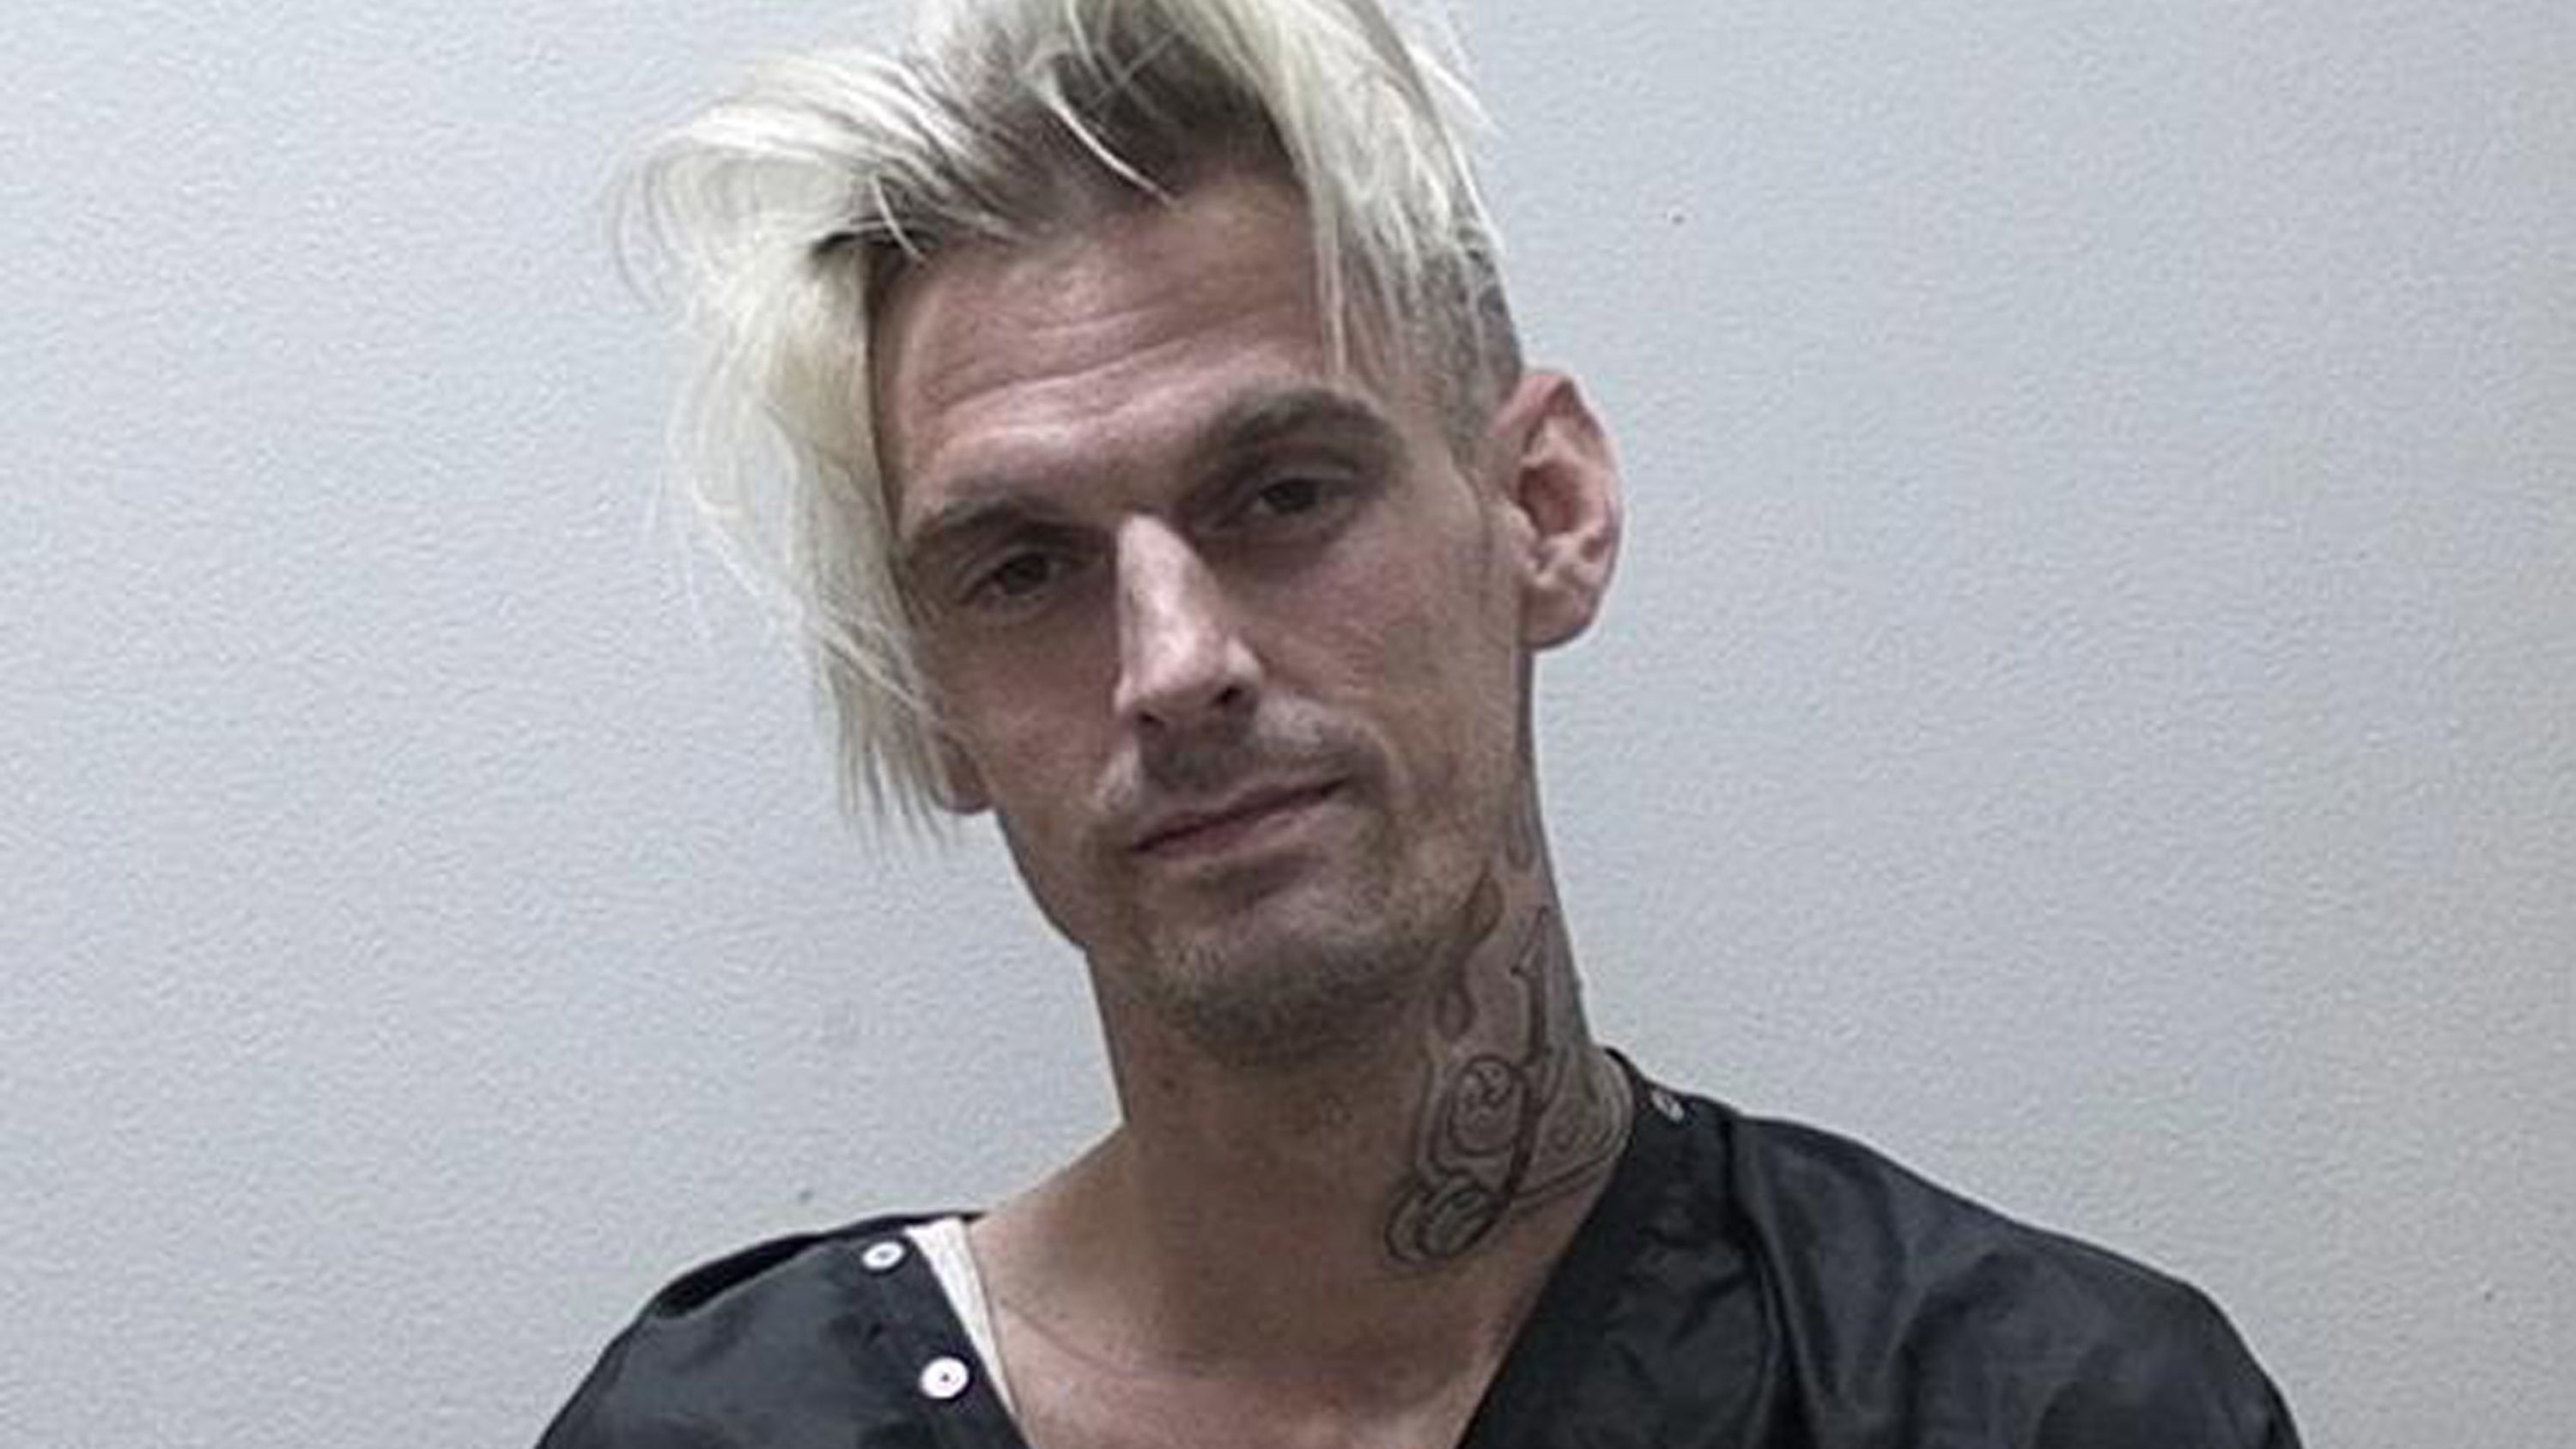 Aaron Carter was charged for marijuana possession and suspicion of driving under the influence. Carter's girlfriend, Madison Parker, who was with him, was also arrested with drug-related charges and obstruction.